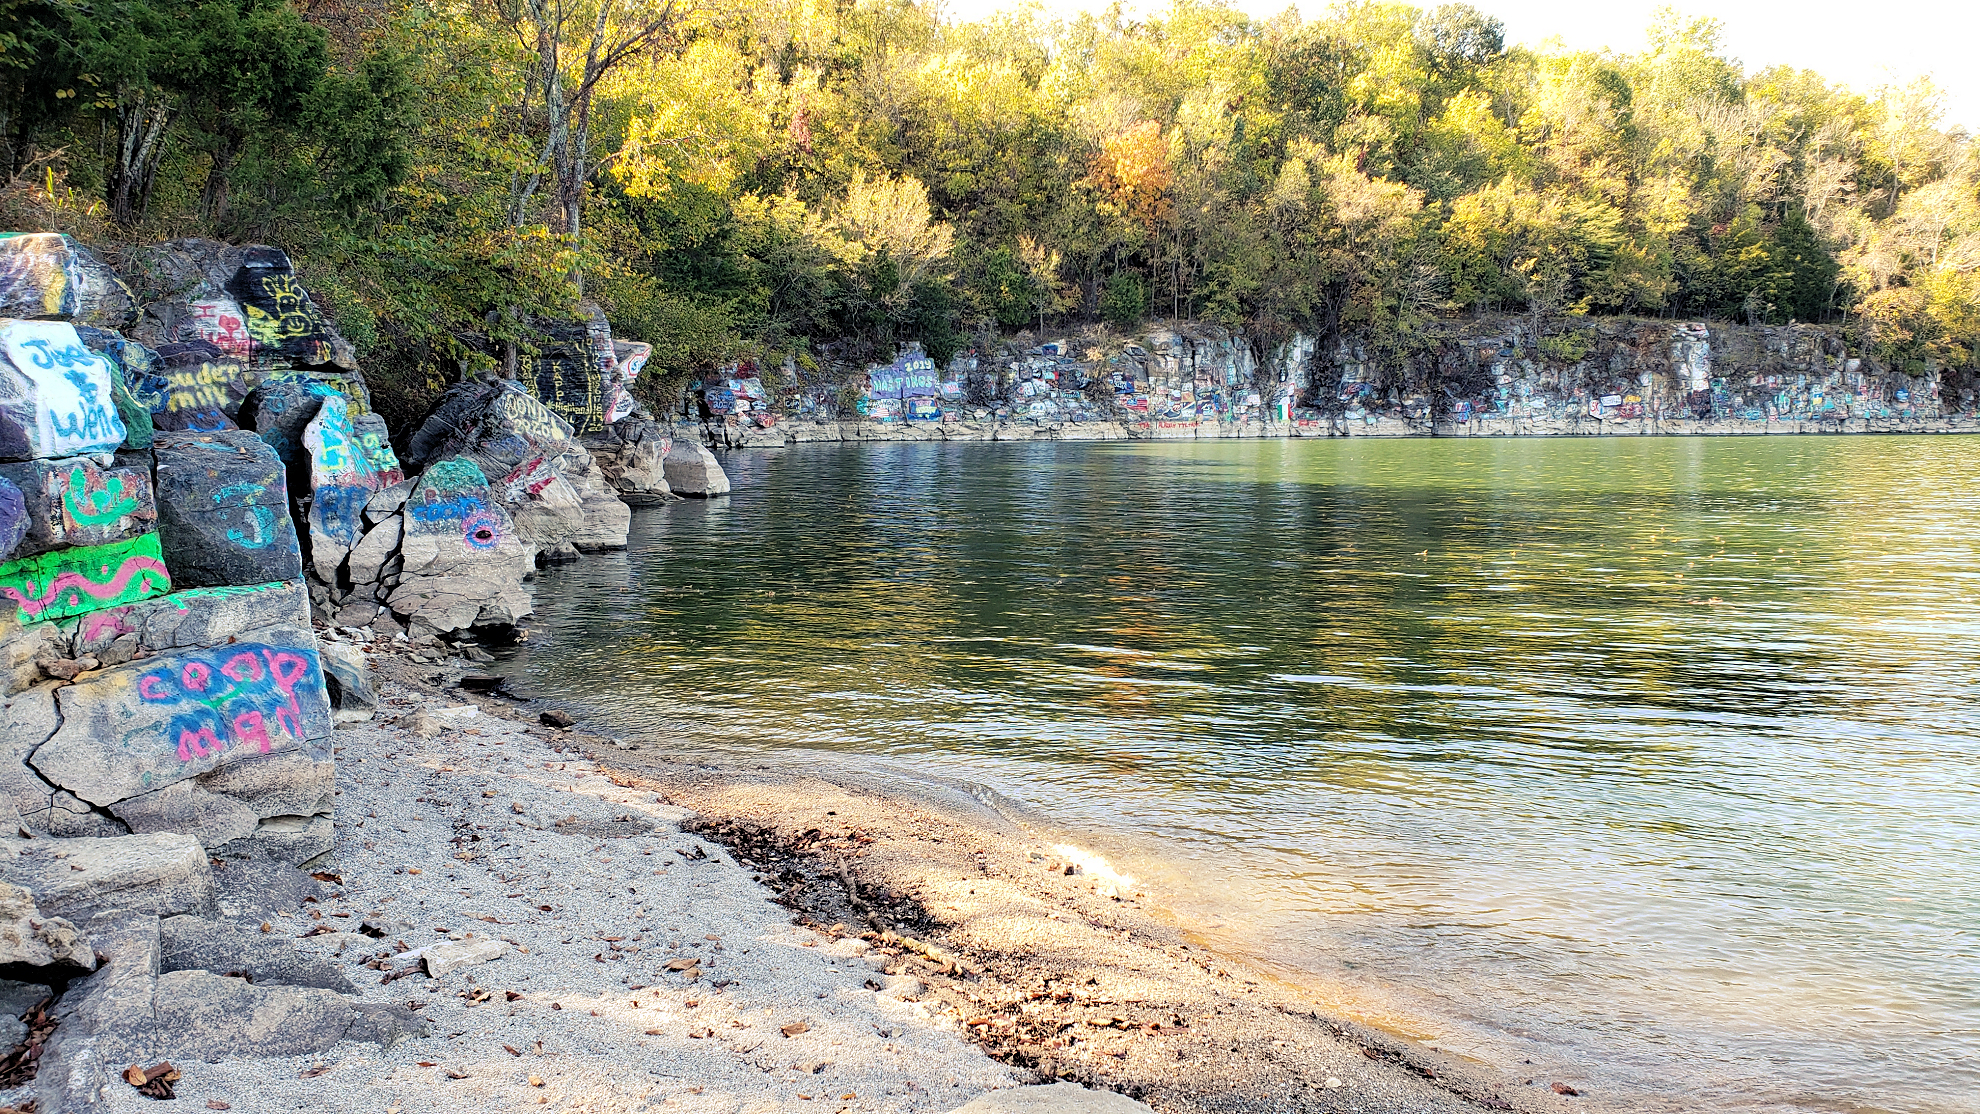 Kentucky Lake’s ‘Party Cove’ – The Creation of the Rock Quarry